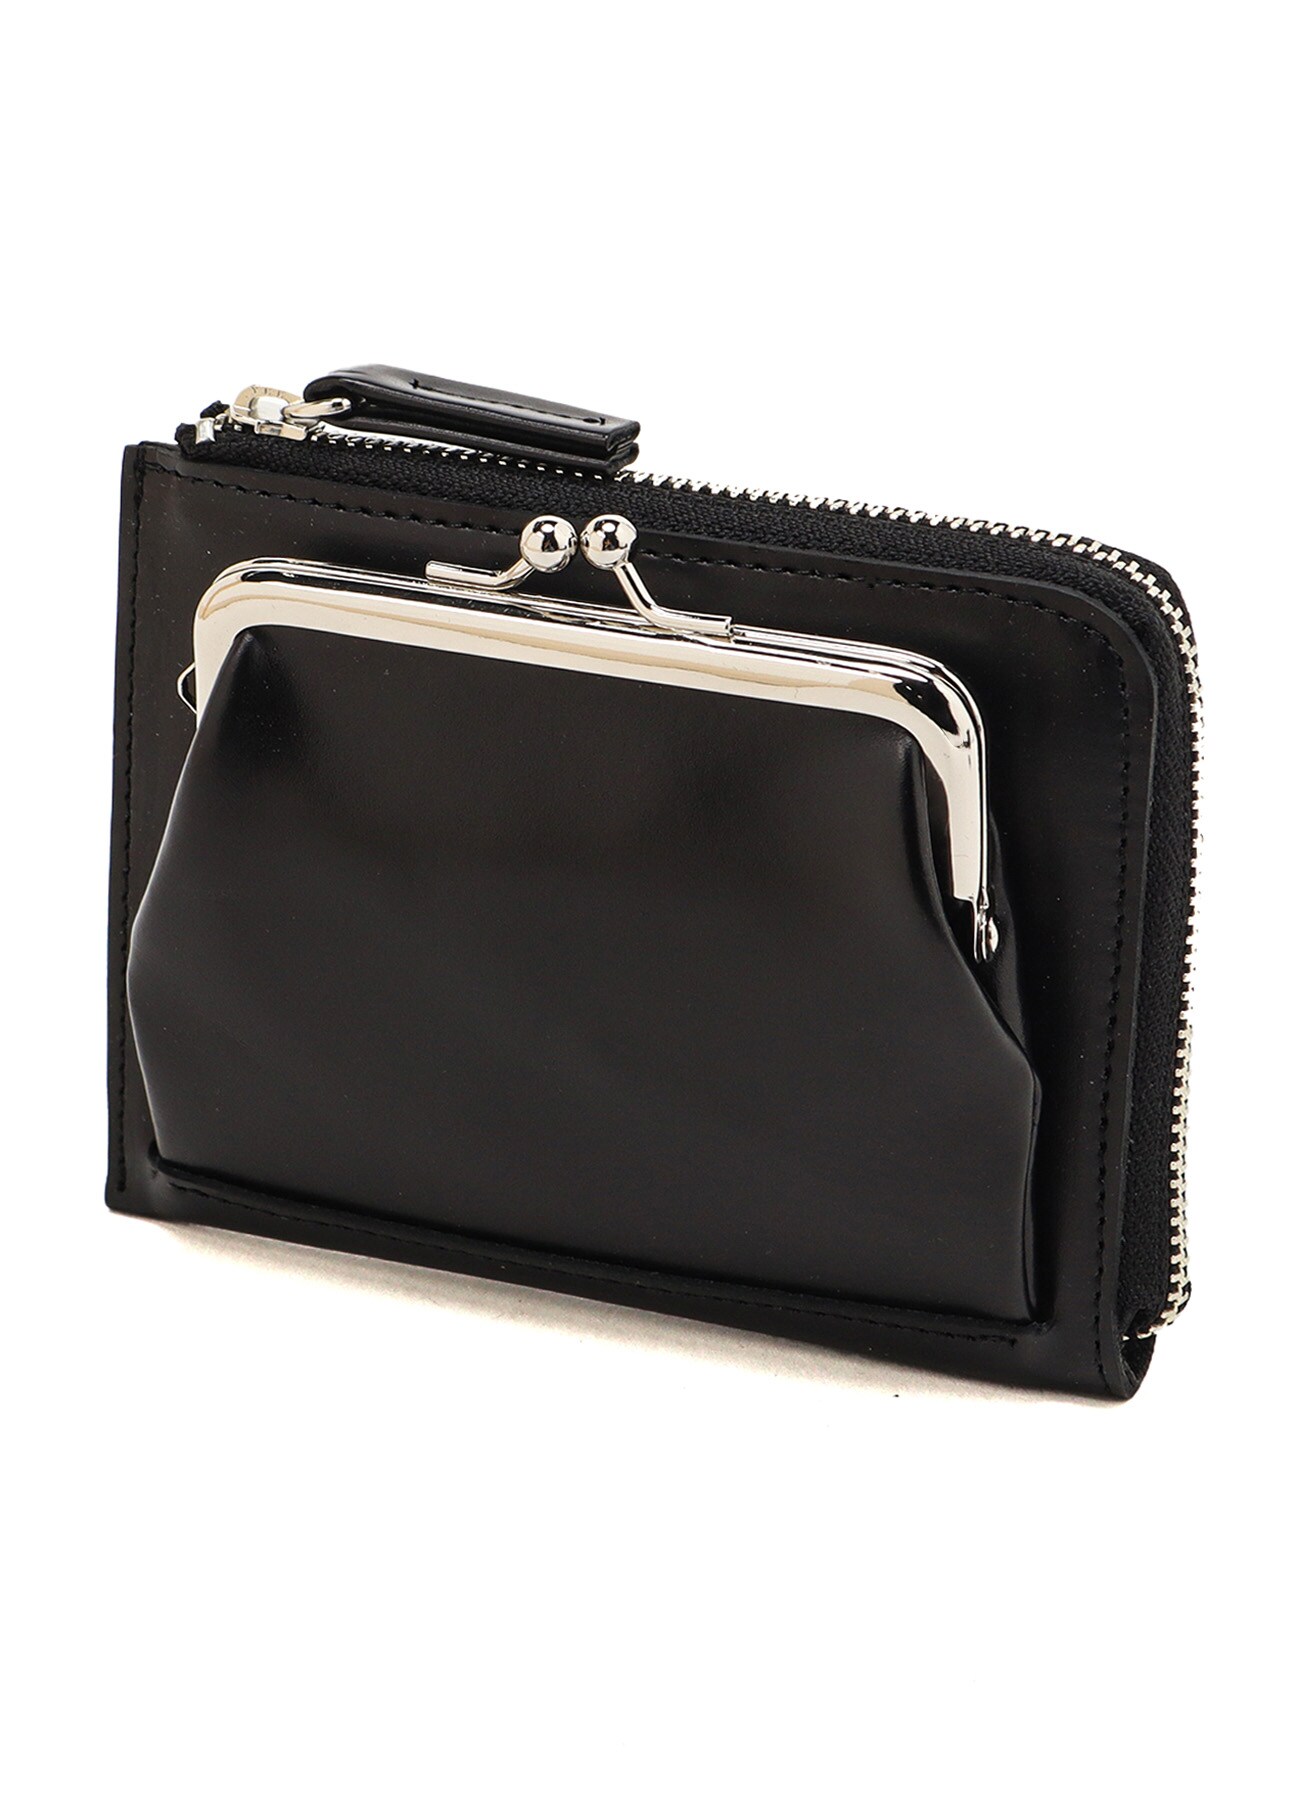 【7/26 12:00(JTS) Release】GLOSSY SMOOTH L-SHAPE WALLET